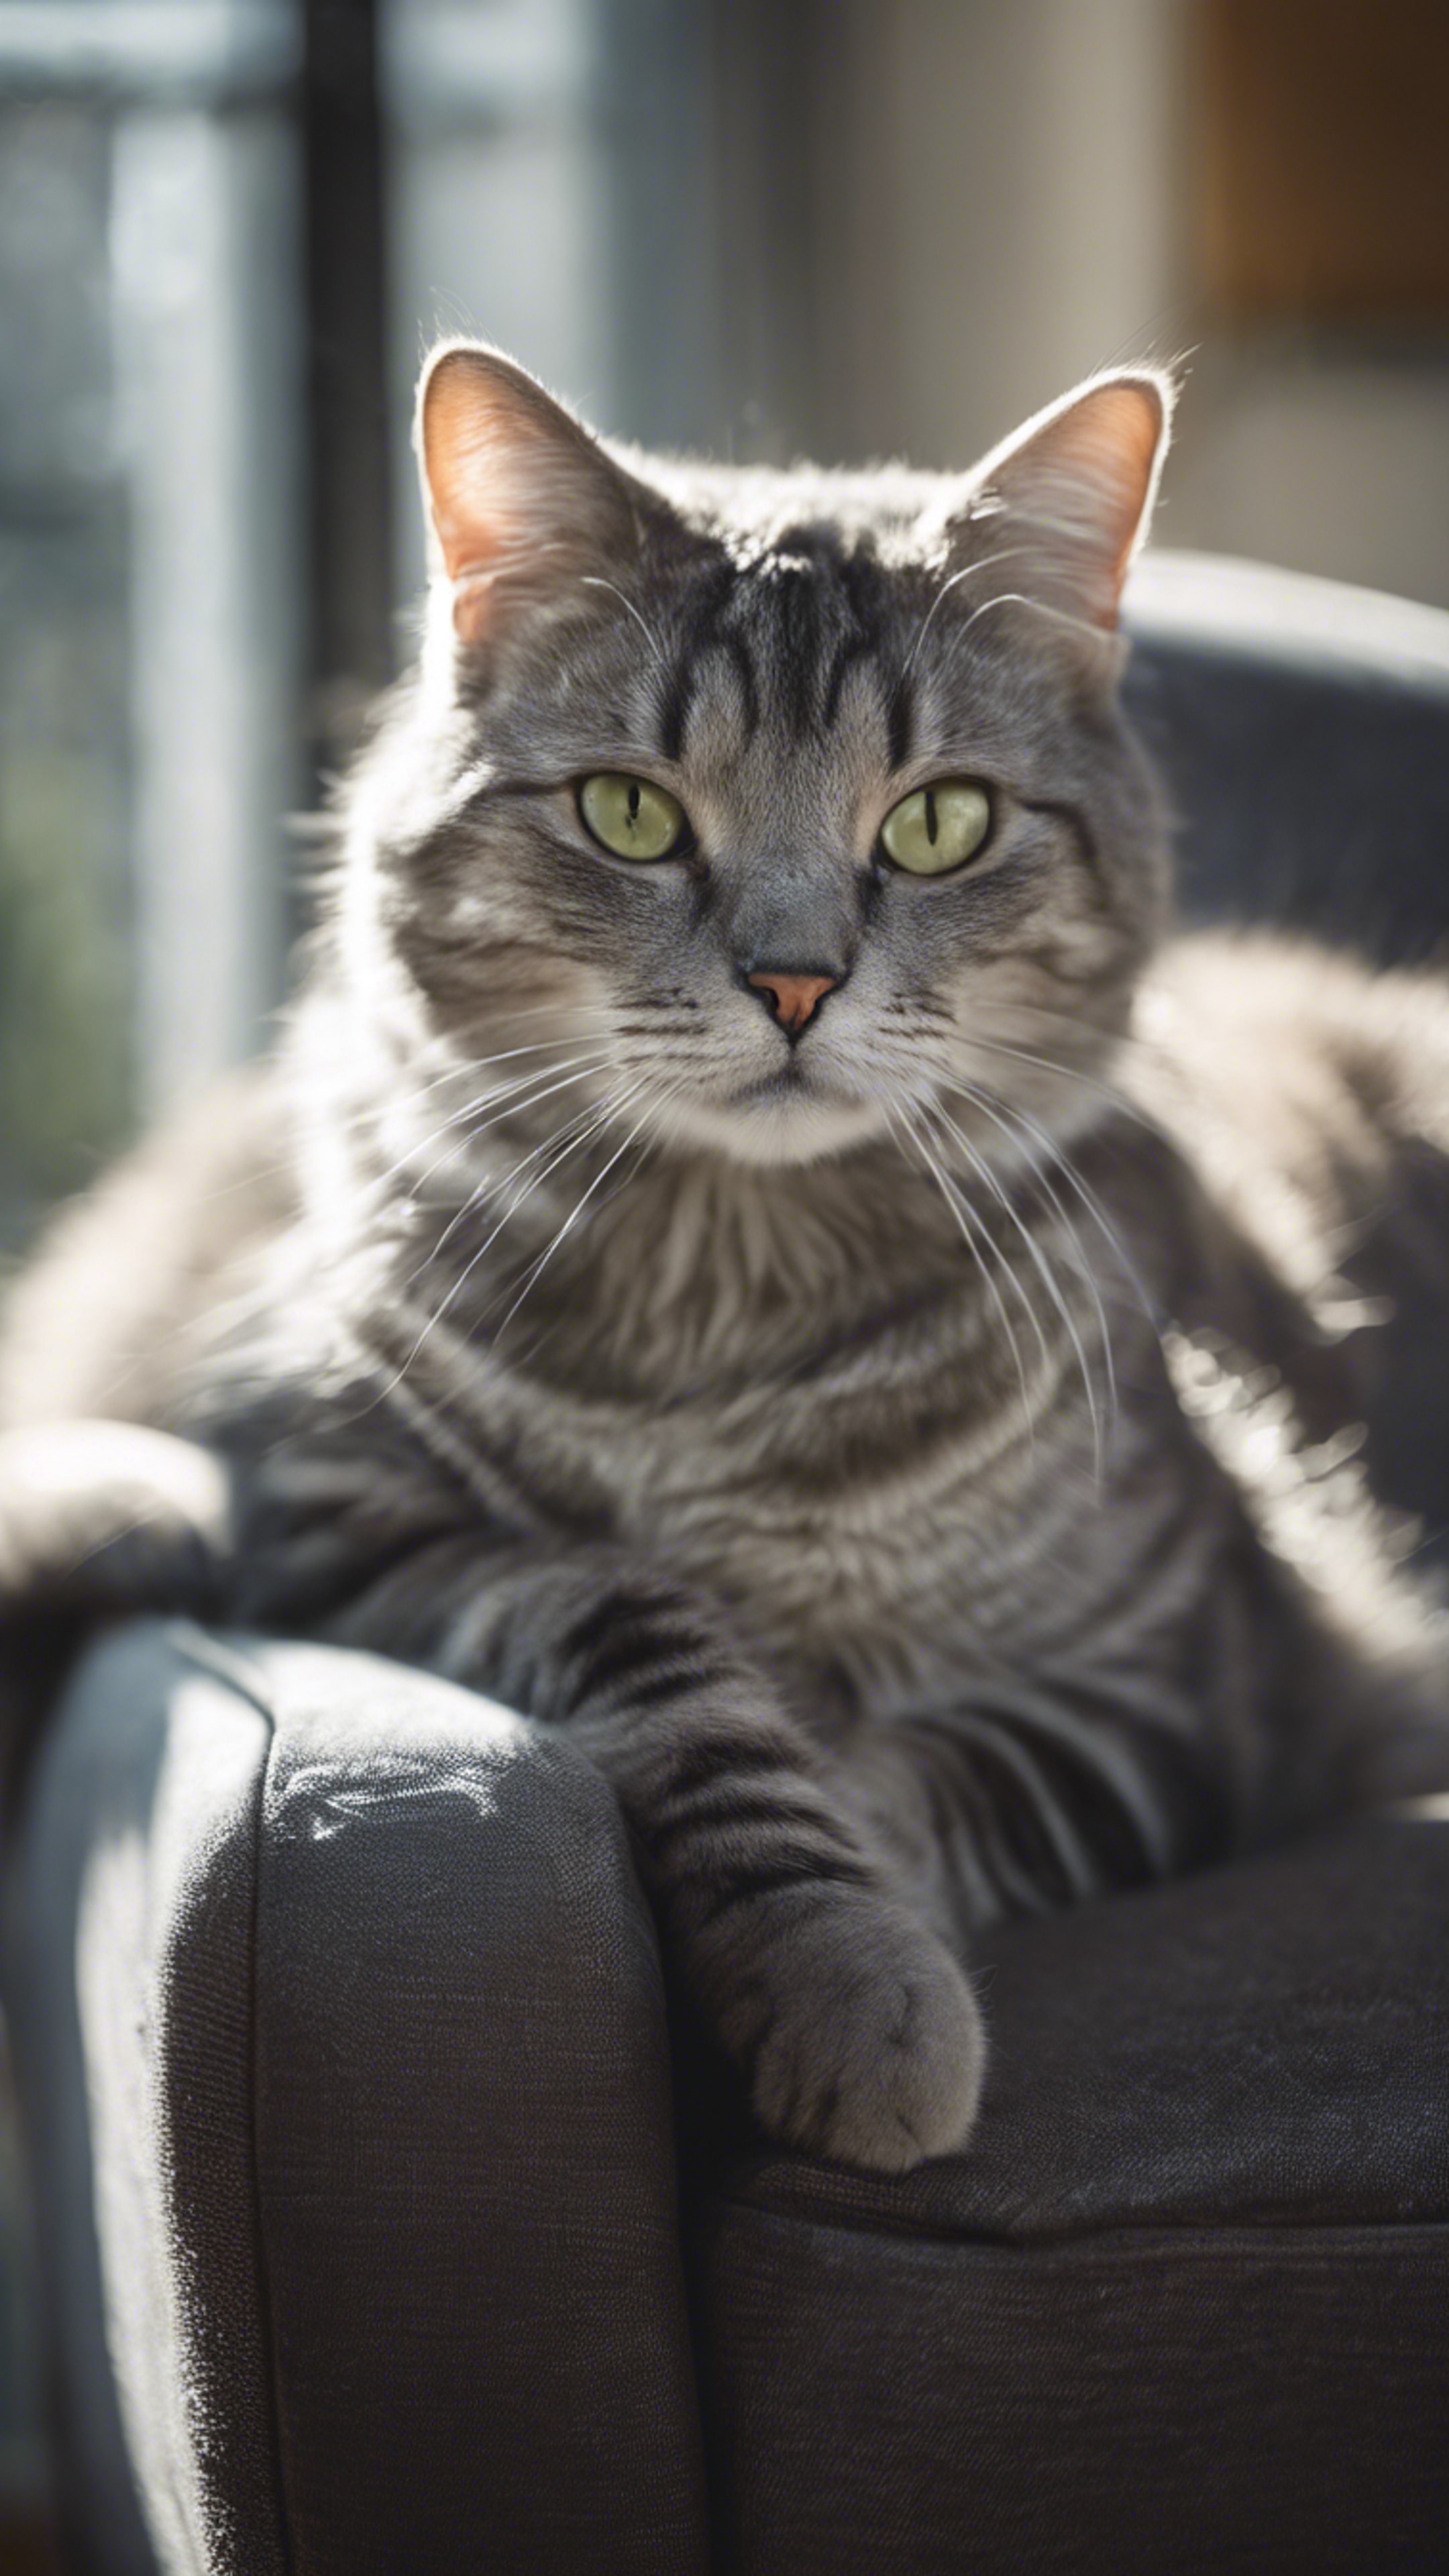 A silver gray tabby cat curled up in a chair, her fur highlighted by daylight streaming through a nearby window. Обои[04135cc69b2c493b883e]